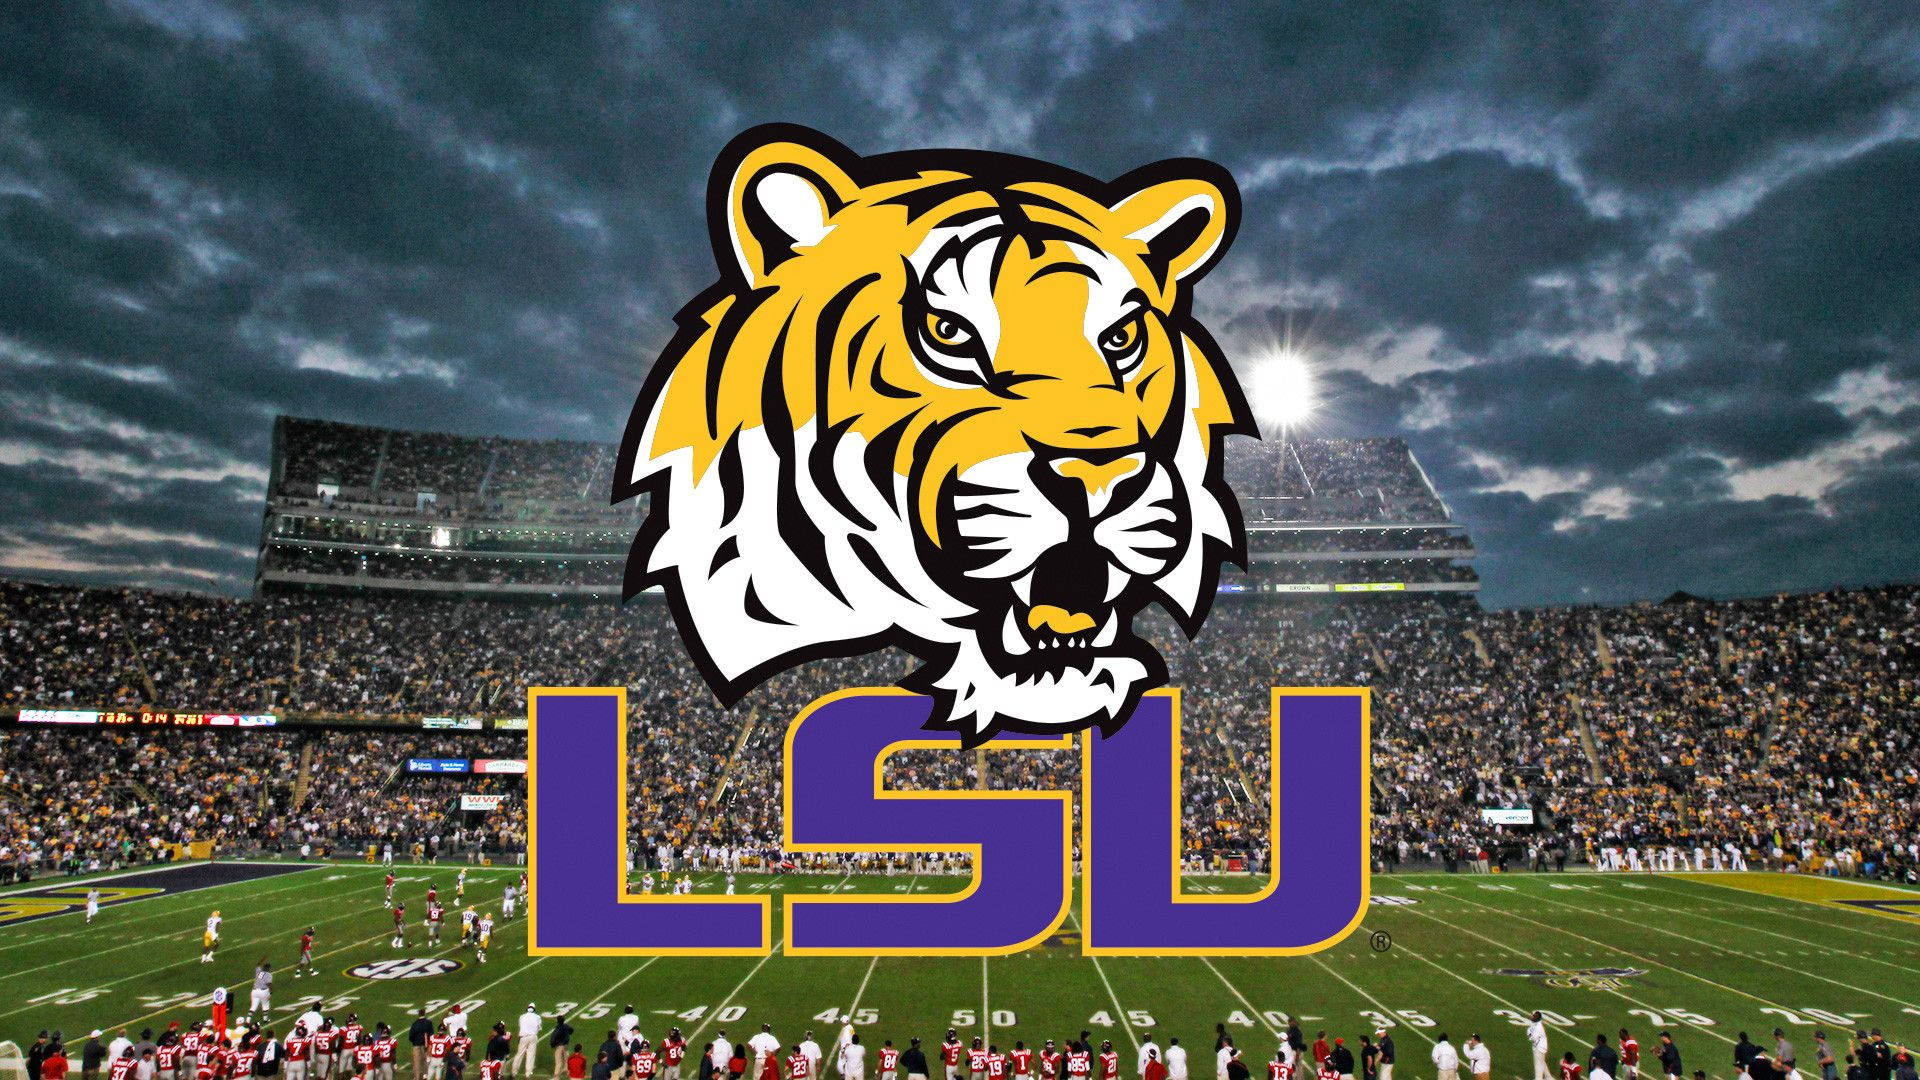 Ready for an LSU Victory Wallpaper